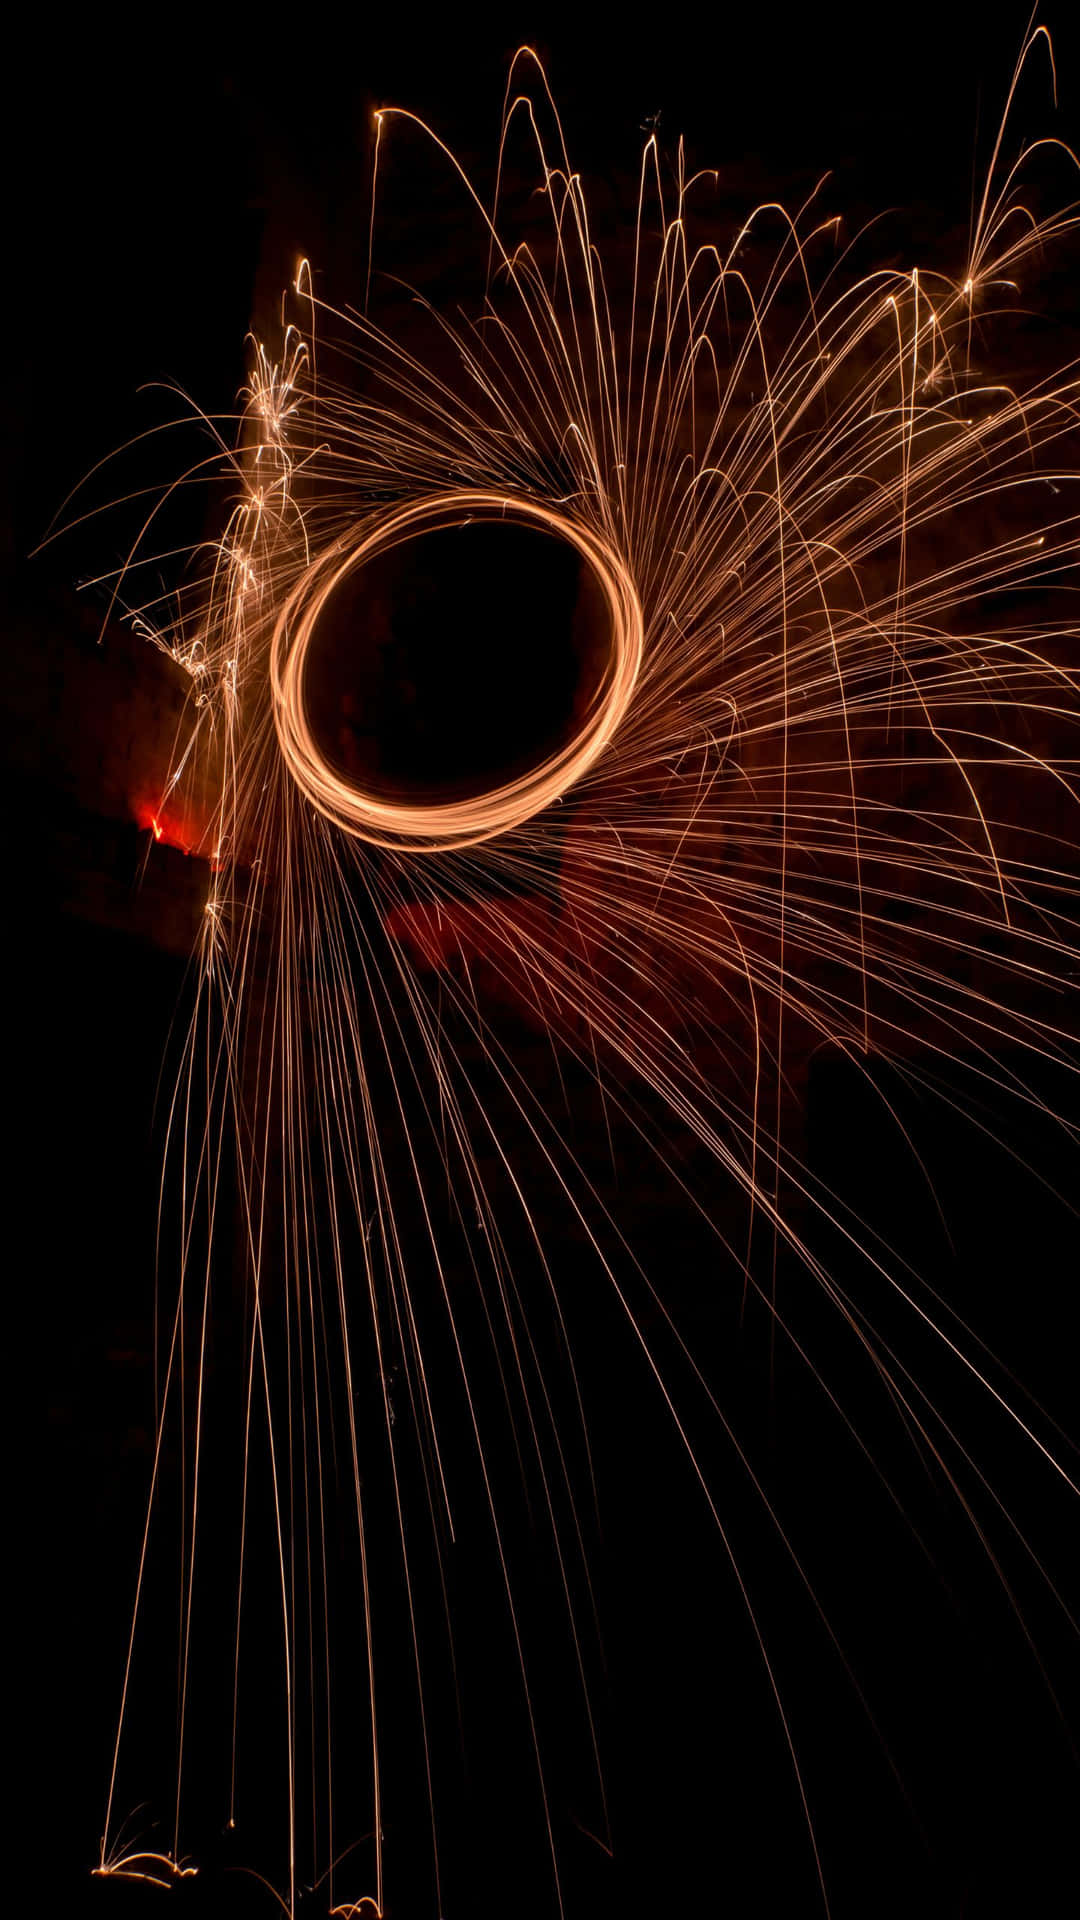 A Circle Of Sparks In The Dark Wallpaper